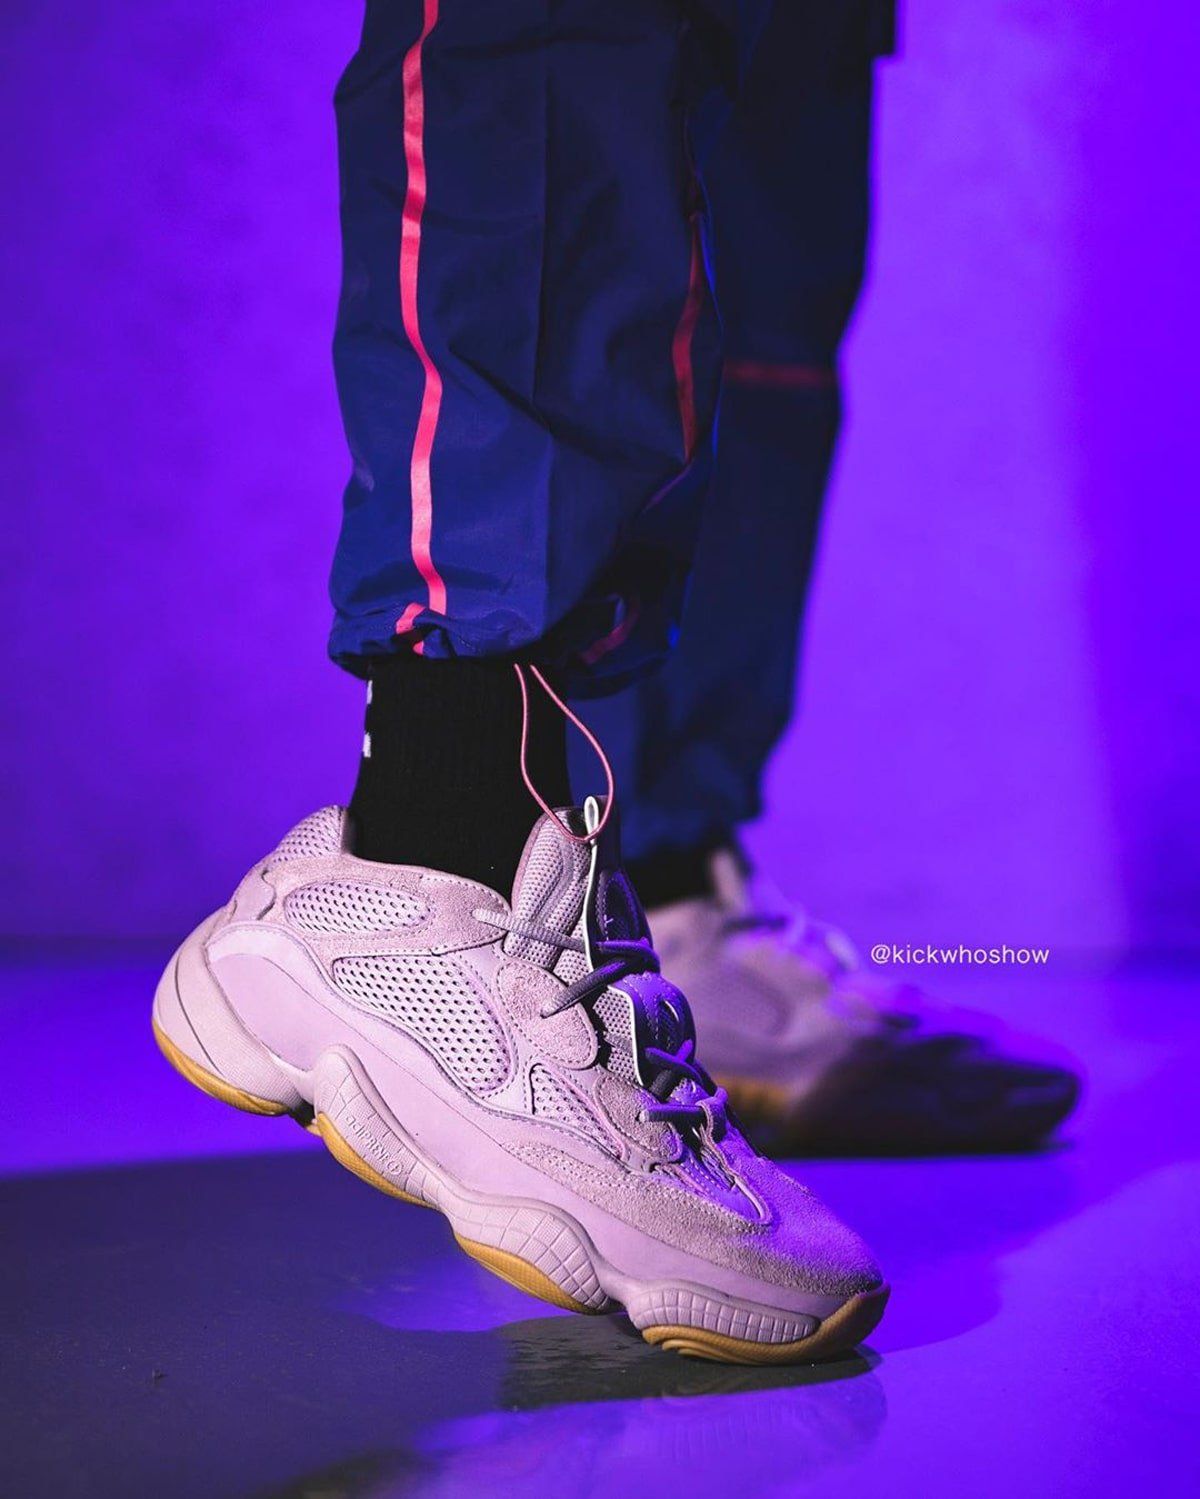 pink yeezy 500 soft vision